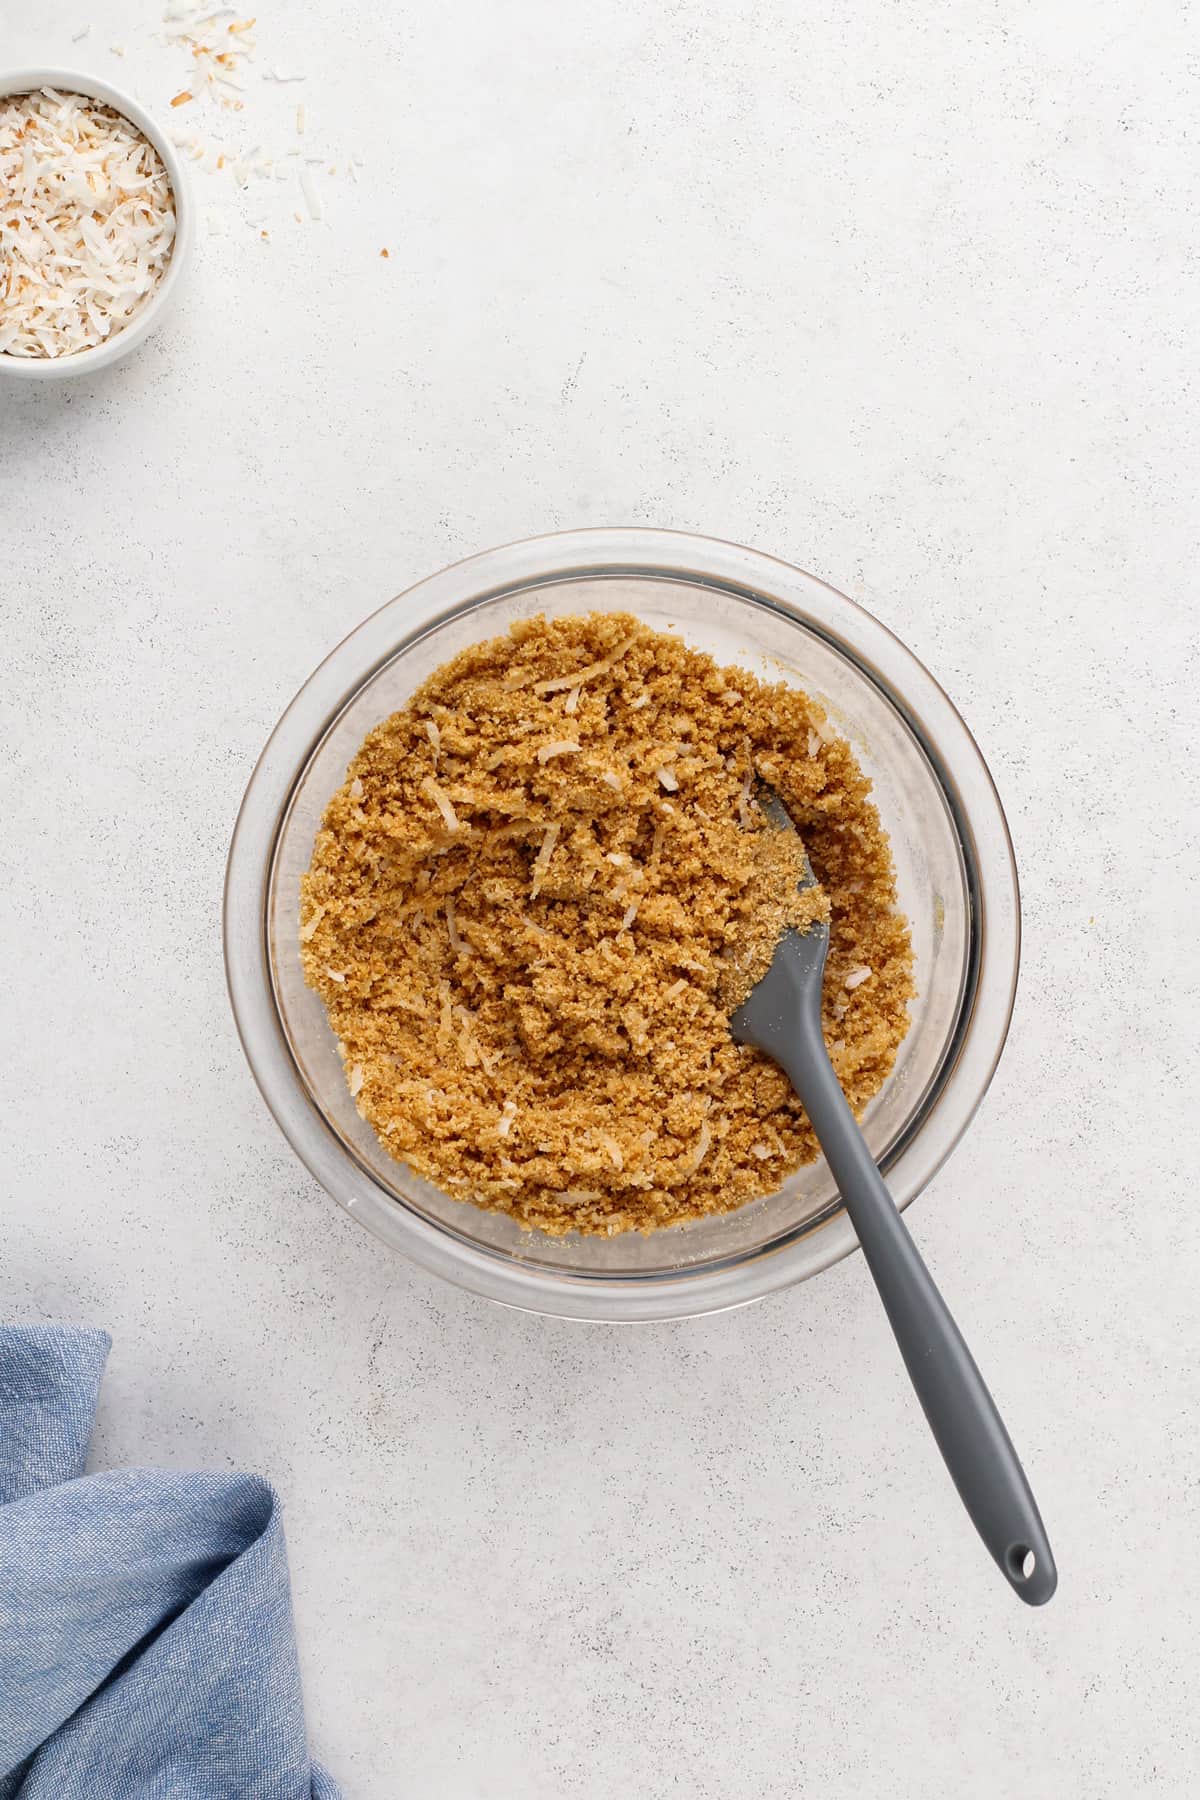 Graham cracker crumbs and coconut mixed with melted butter in a glass mixing bowl.